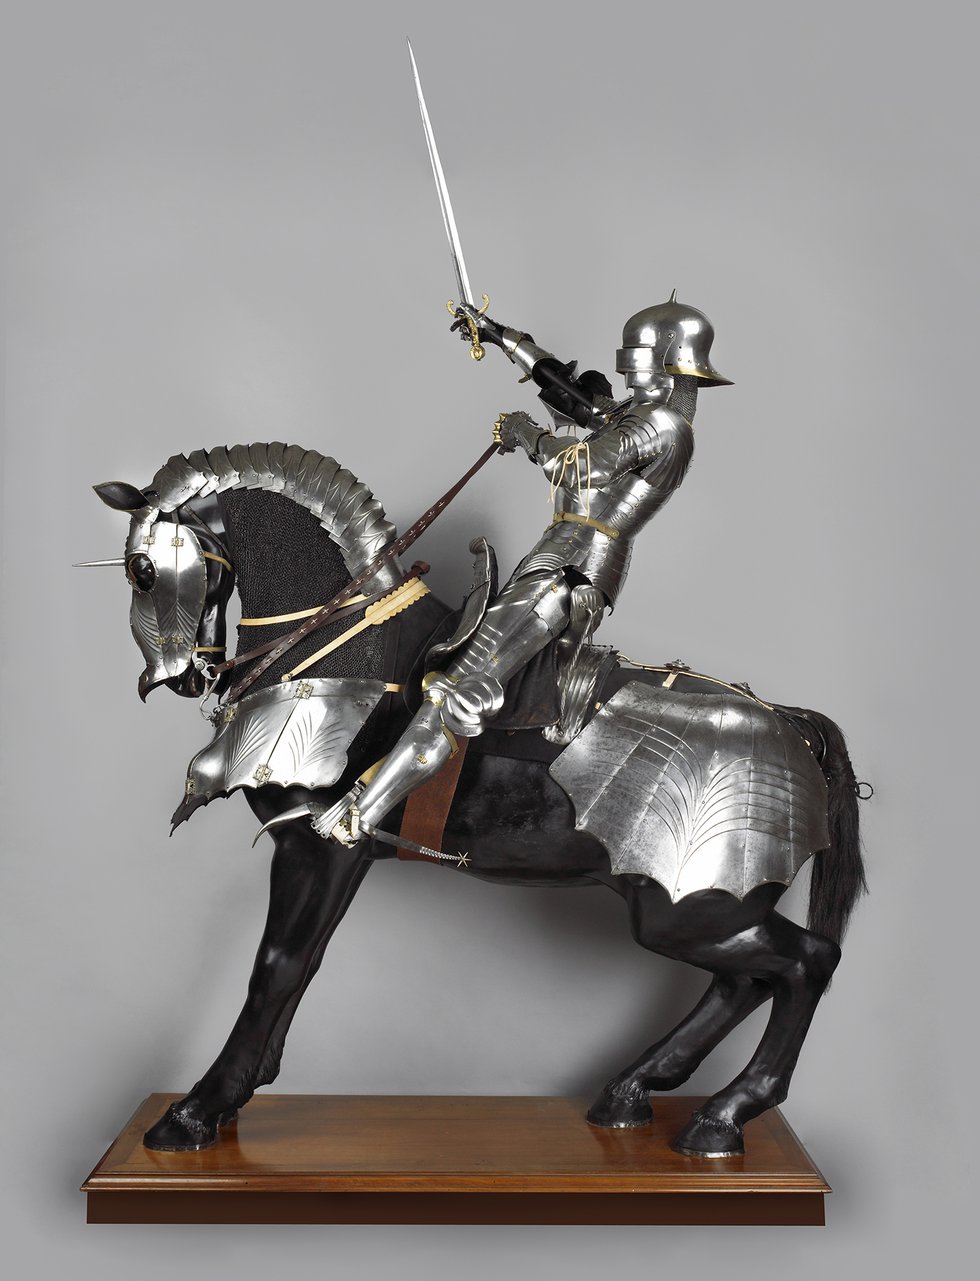 Full length photograph of a medieval knight on an armoured horse from the left